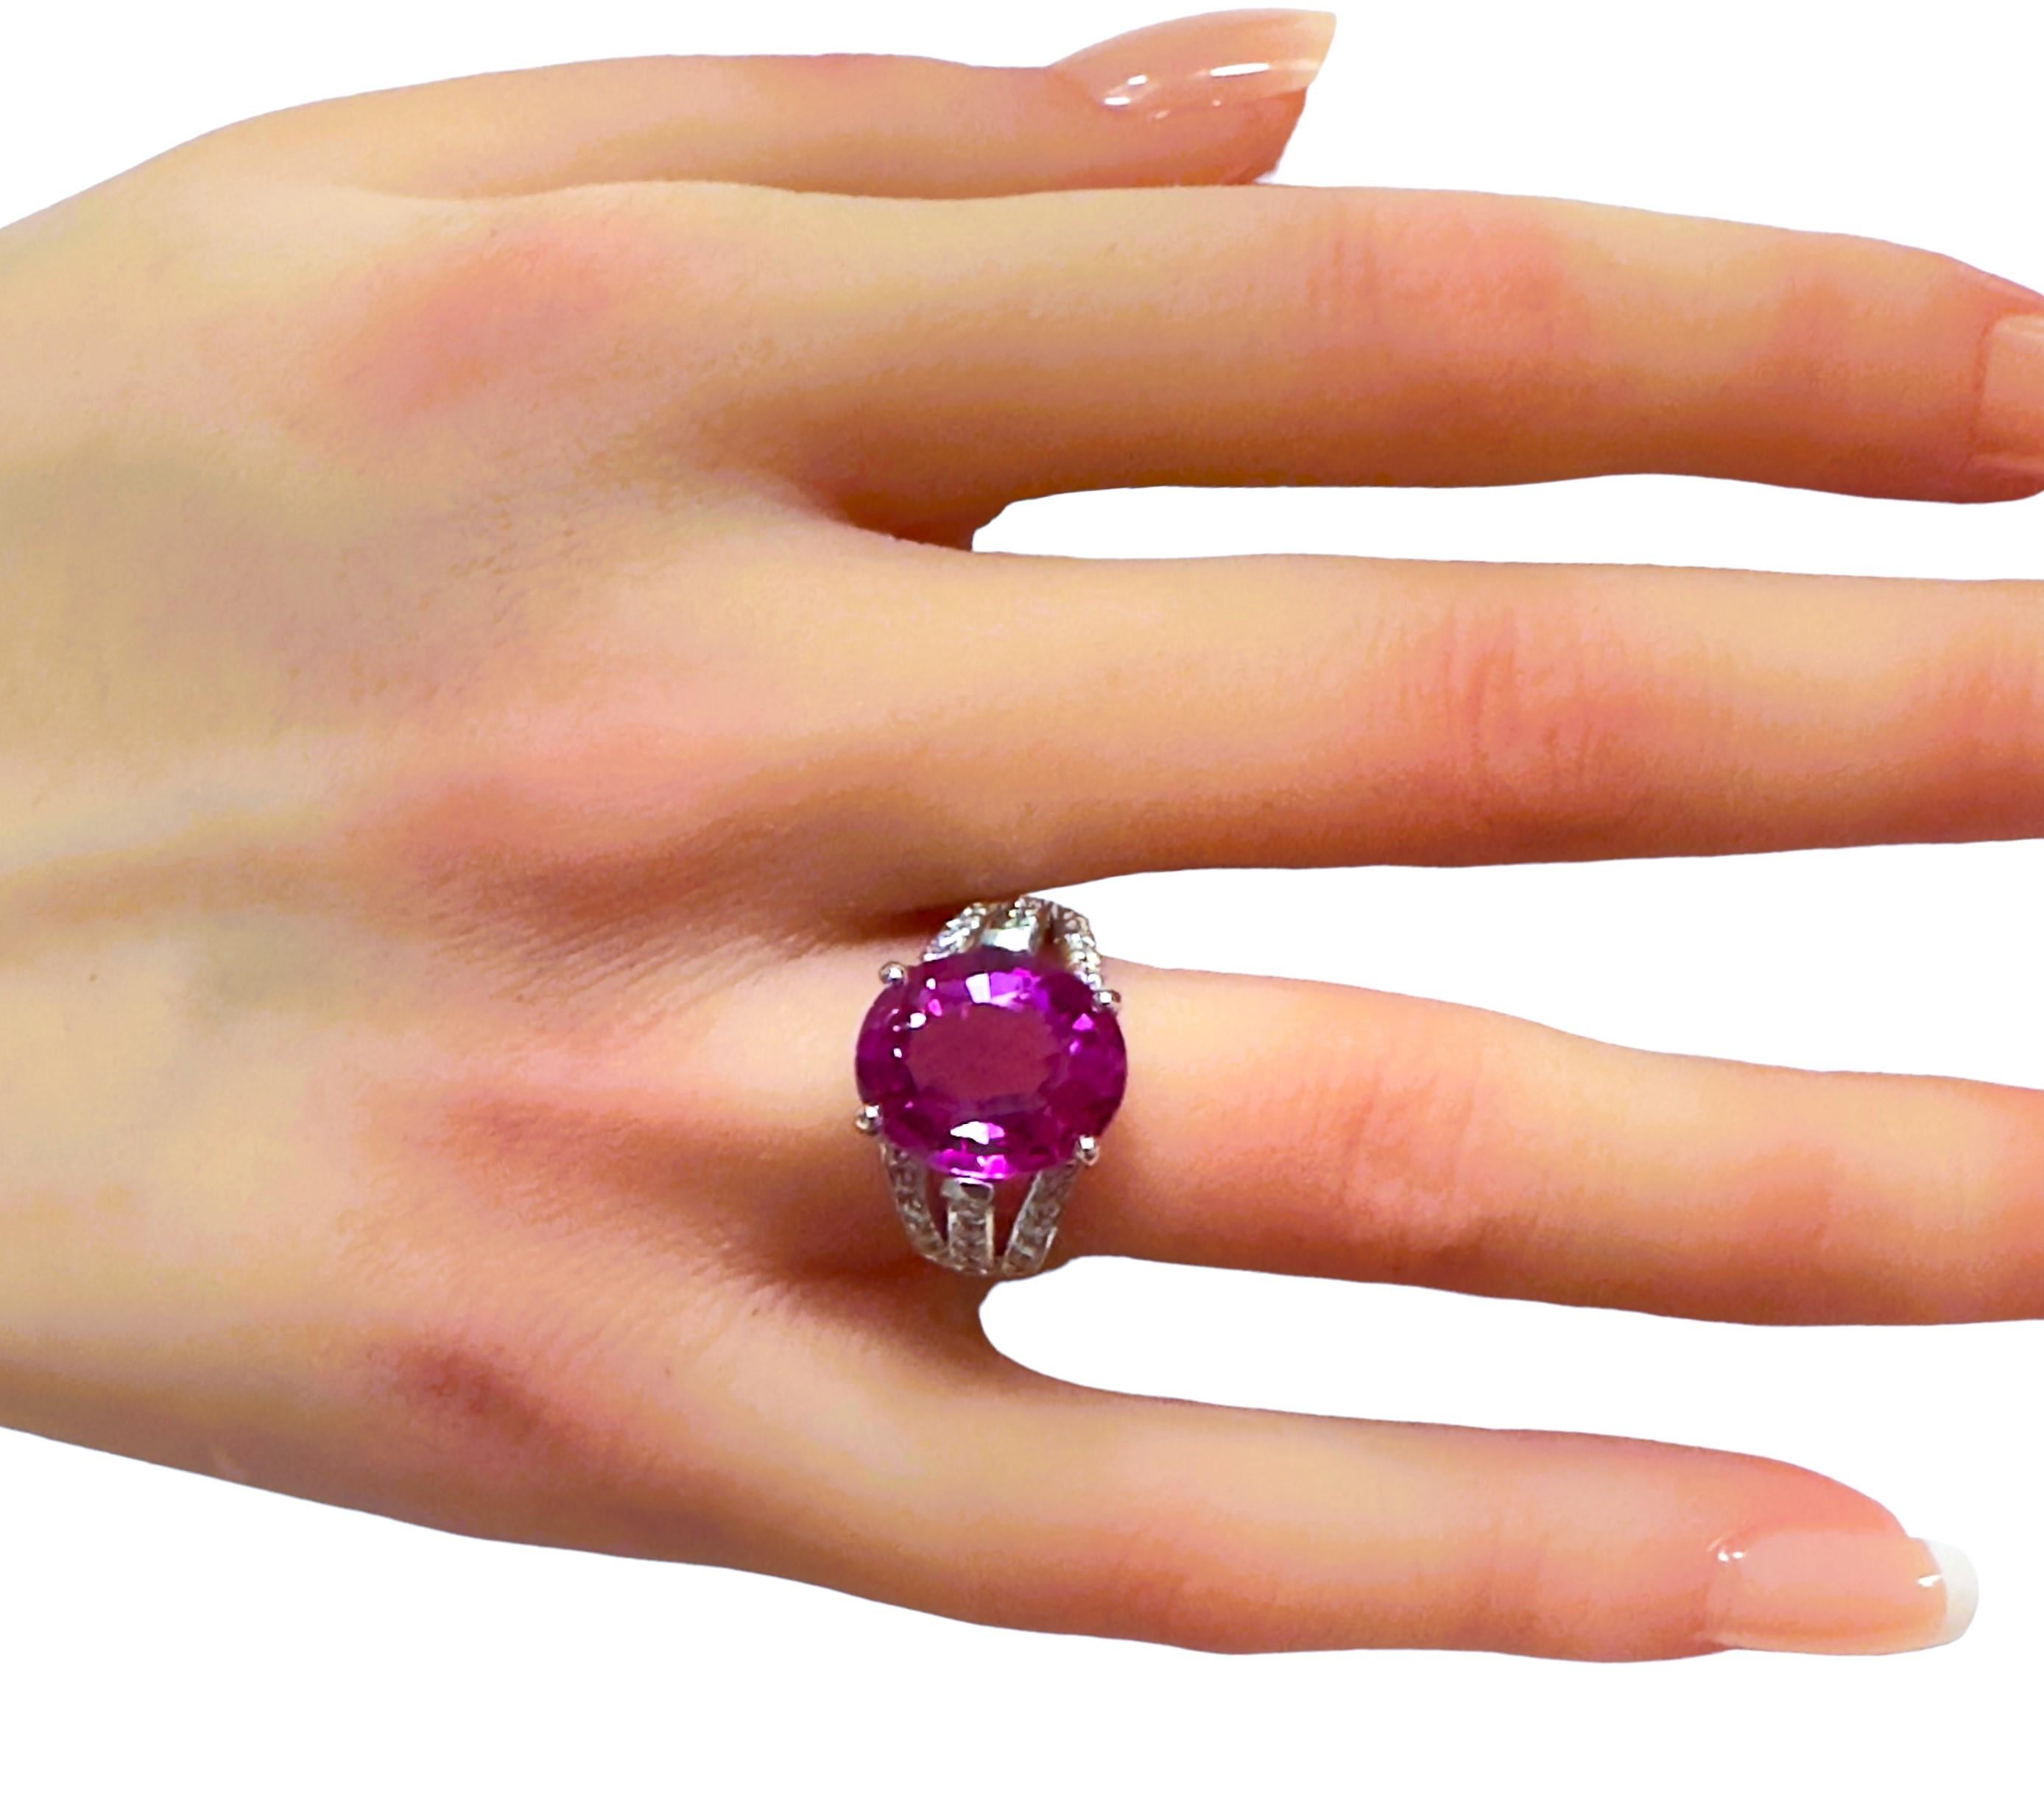 New African 8.0 Ct Pink Sapphire Sterling Ring Size 6 For Sale 2